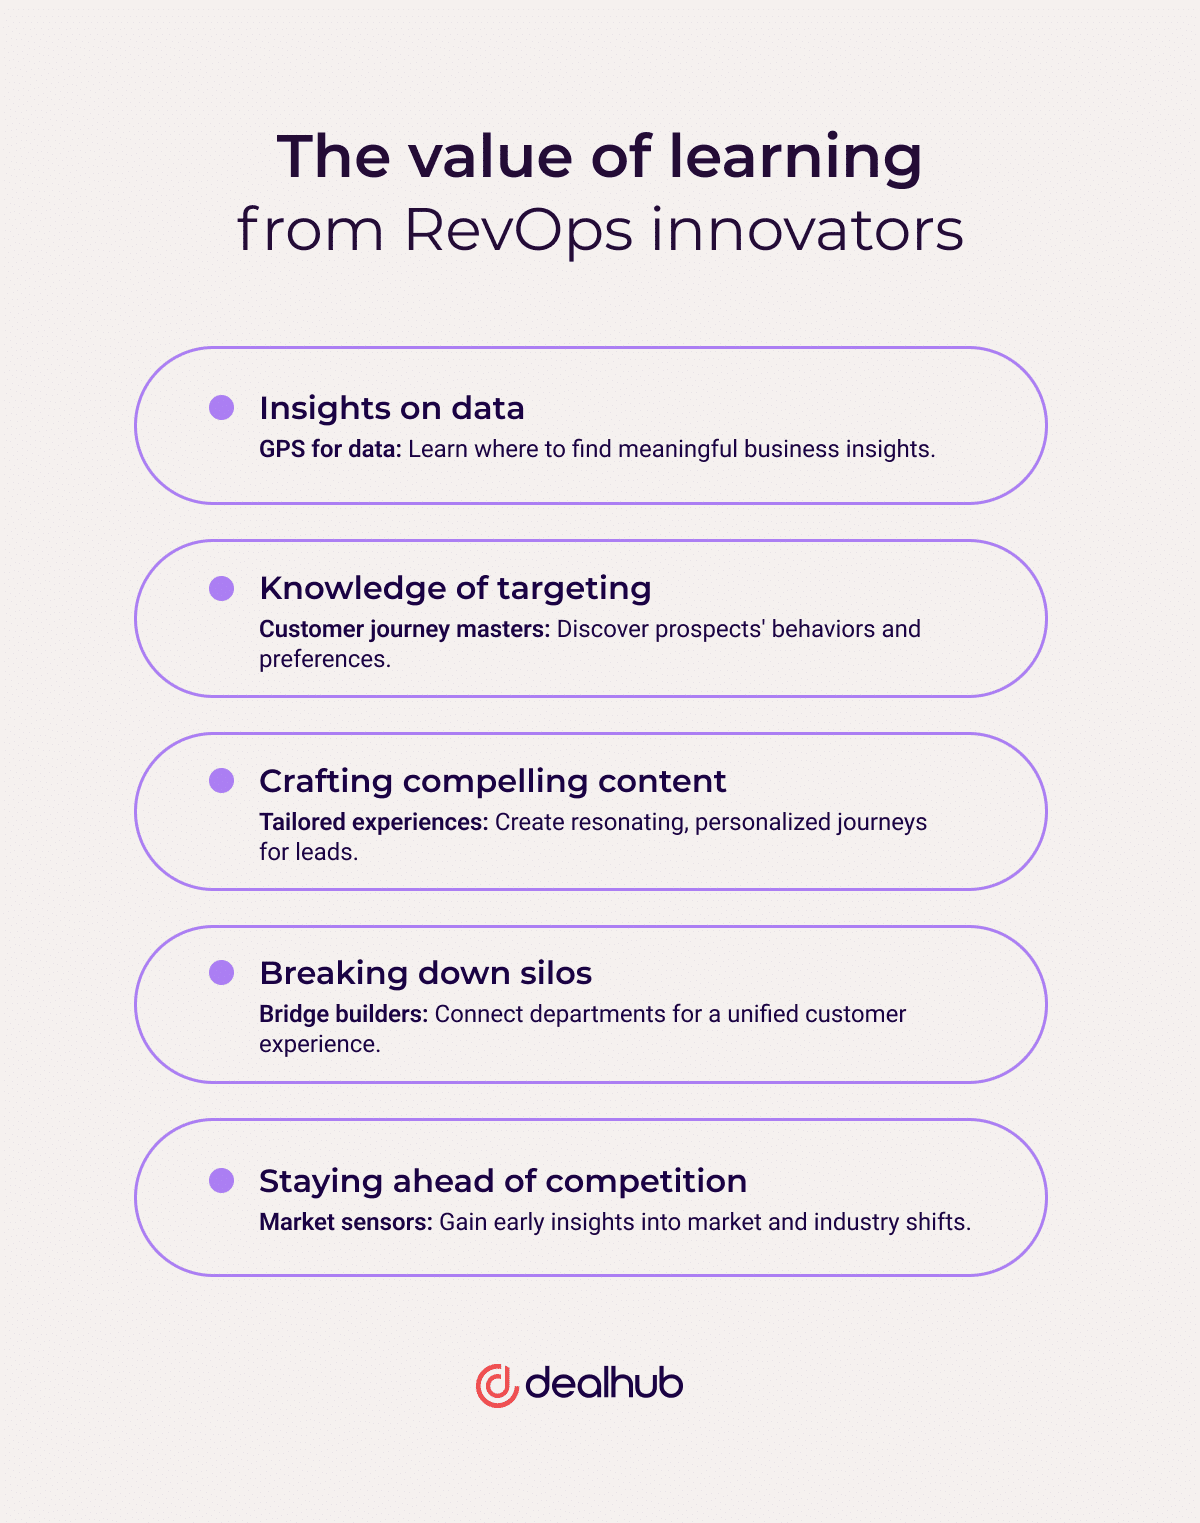 Why it's important to seek out RevOps innovators